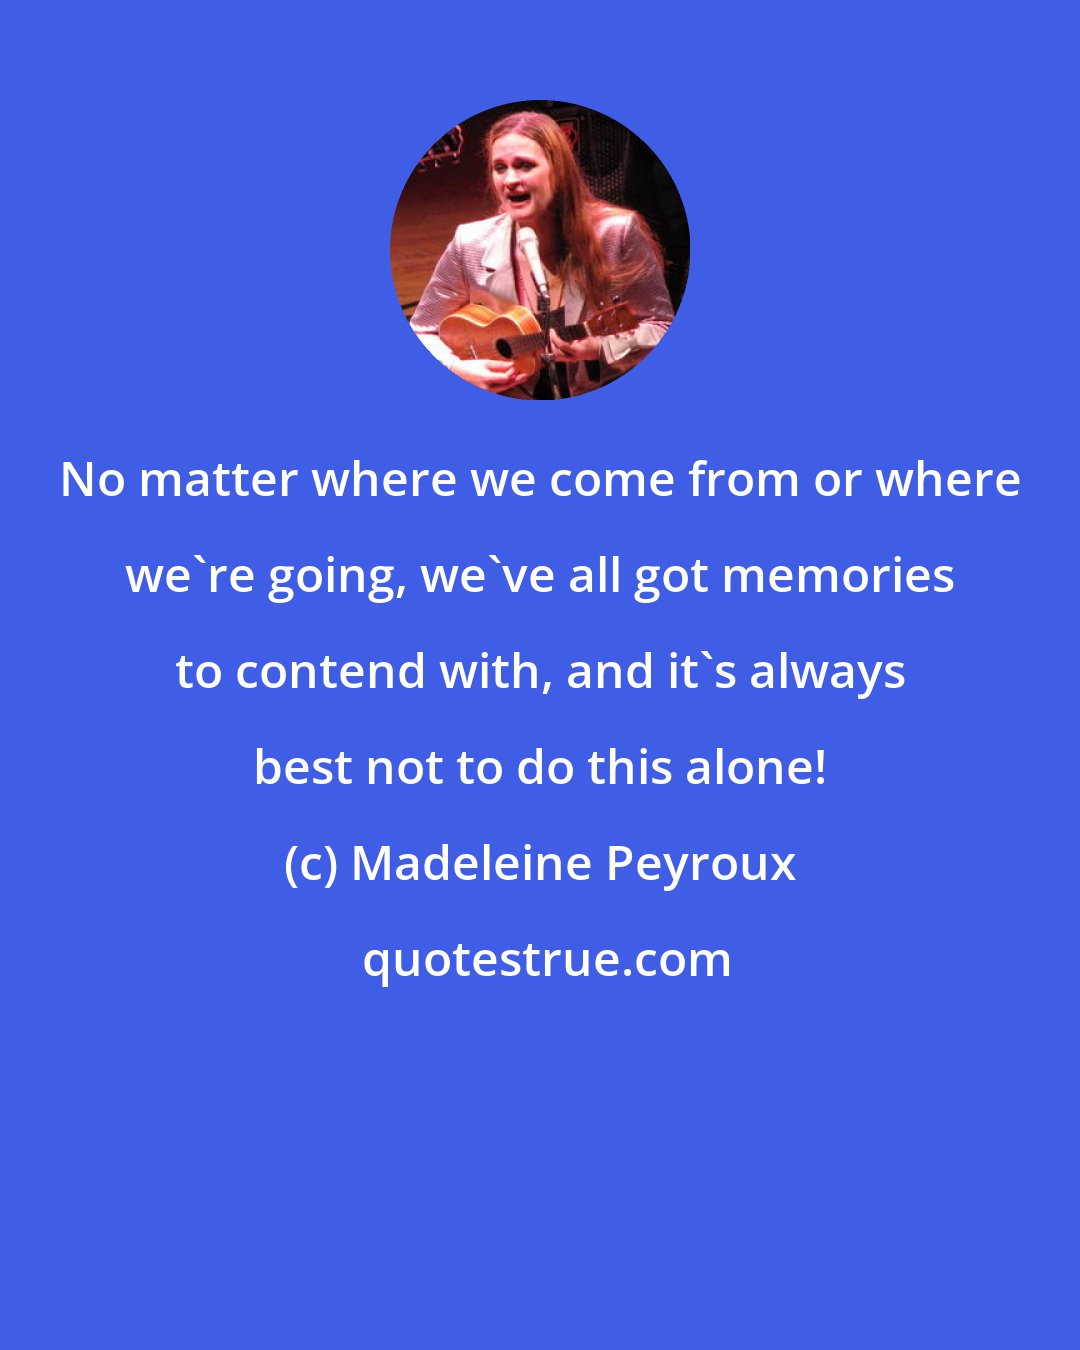 Madeleine Peyroux: No matter where we come from or where we're going, we've all got memories to contend with, and it's always best not to do this alone!